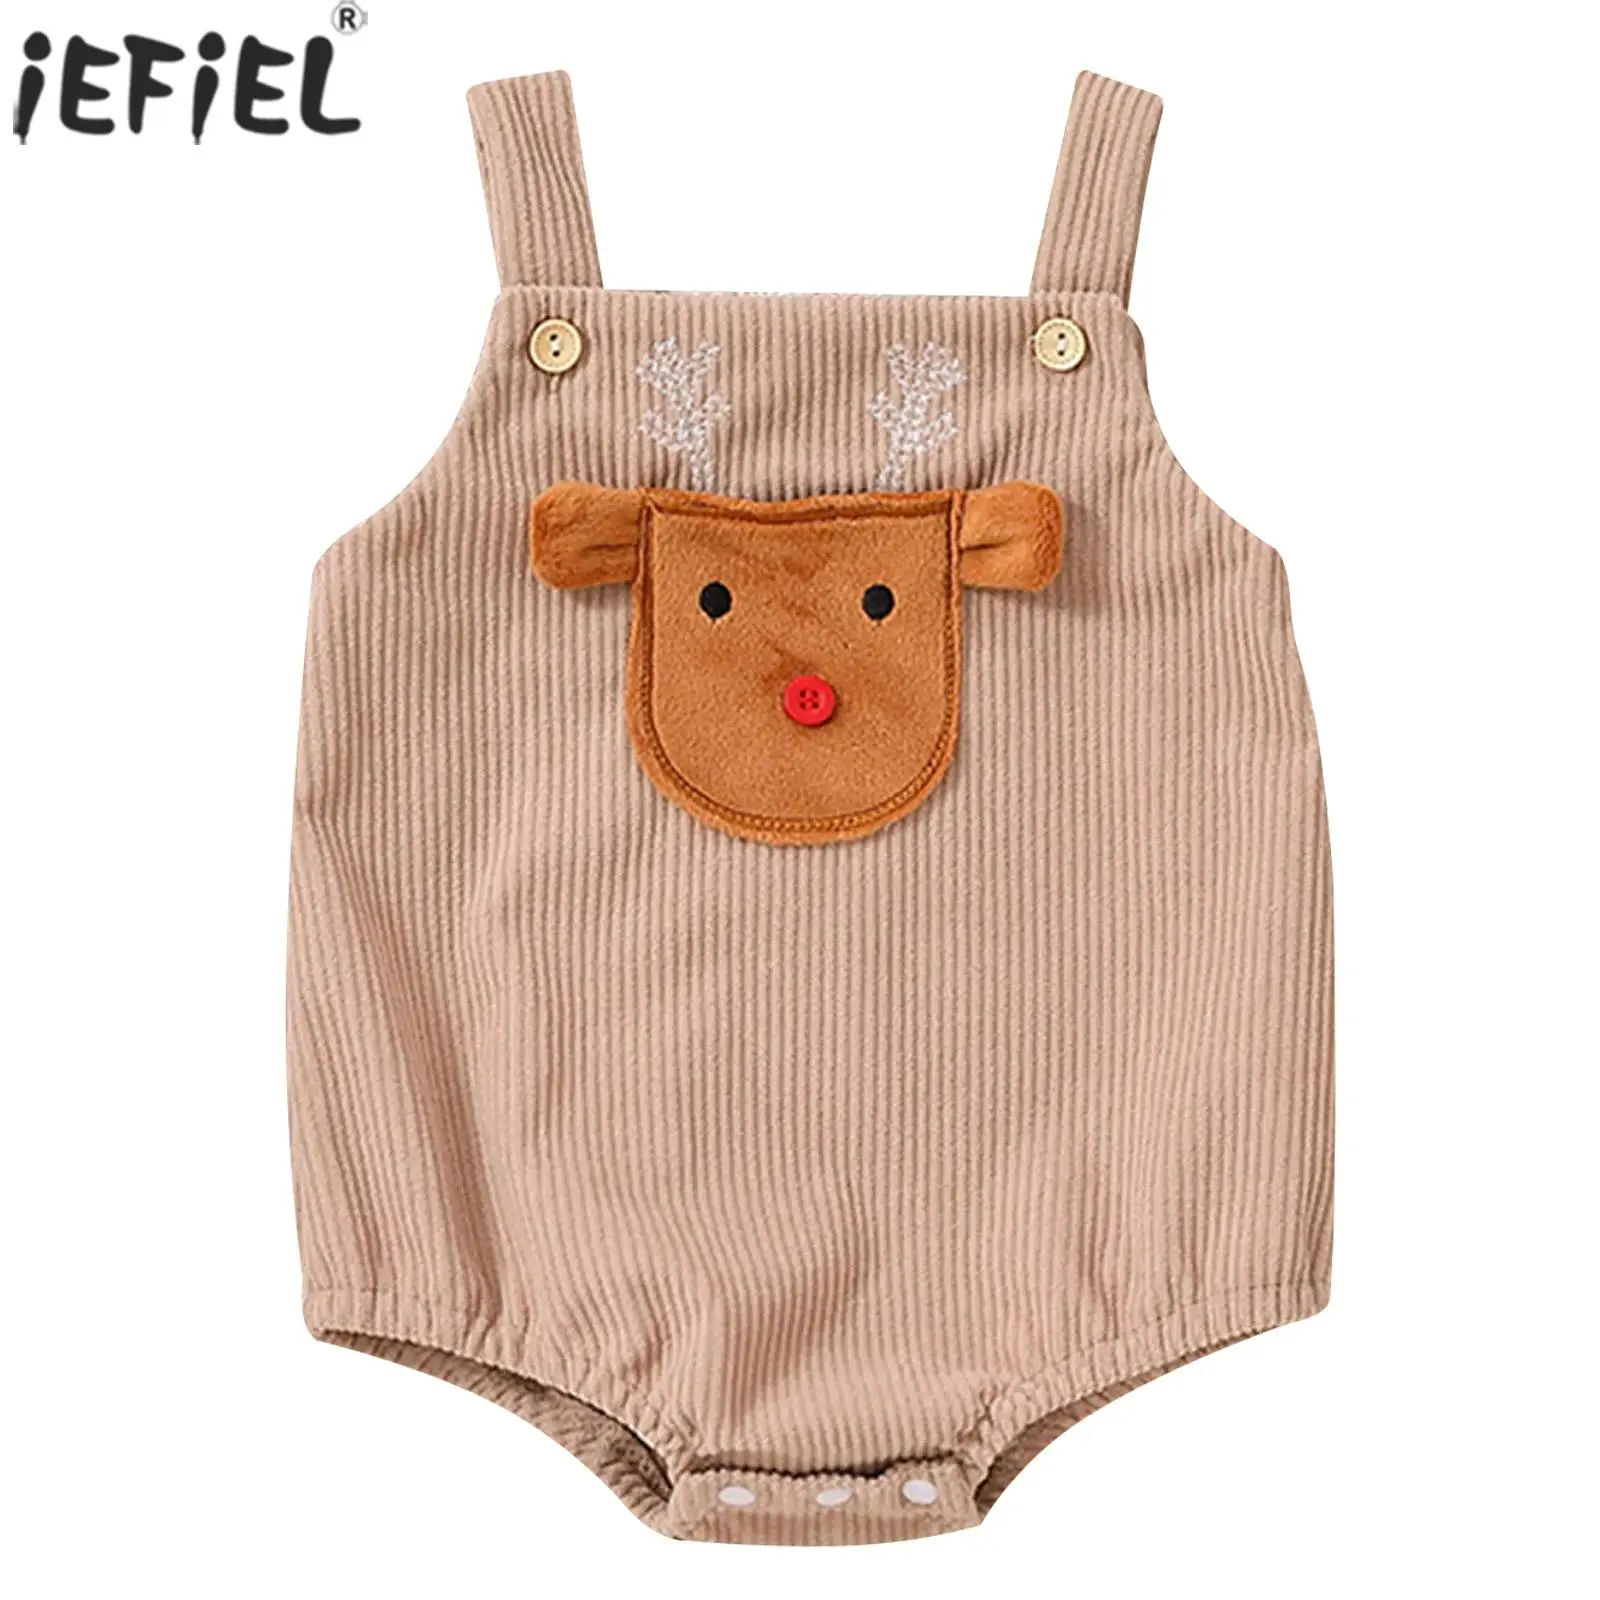 

Toddler Unisex Baby Ribbed Corduroy Romper Bodysuit Sleeveless Overalls Jumpsuit for Halloween Christmas Theme Party Photography